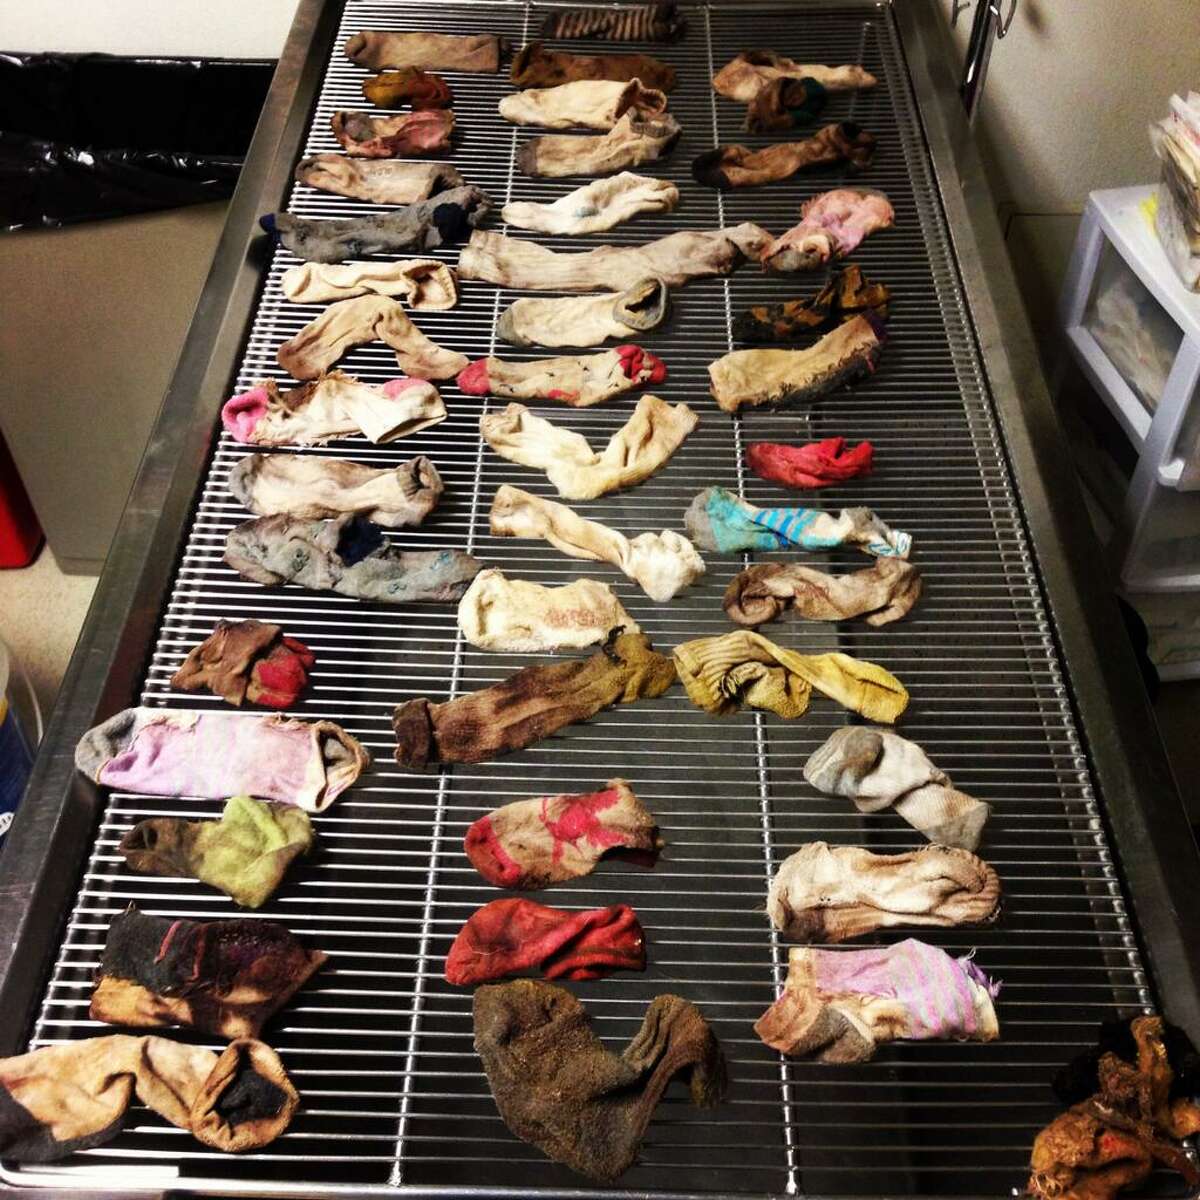 This February 2014 photo provided by DoveLewis Emergency Animal Hospital shows socks that were removed from a dogs stomach in Portland, Ore.